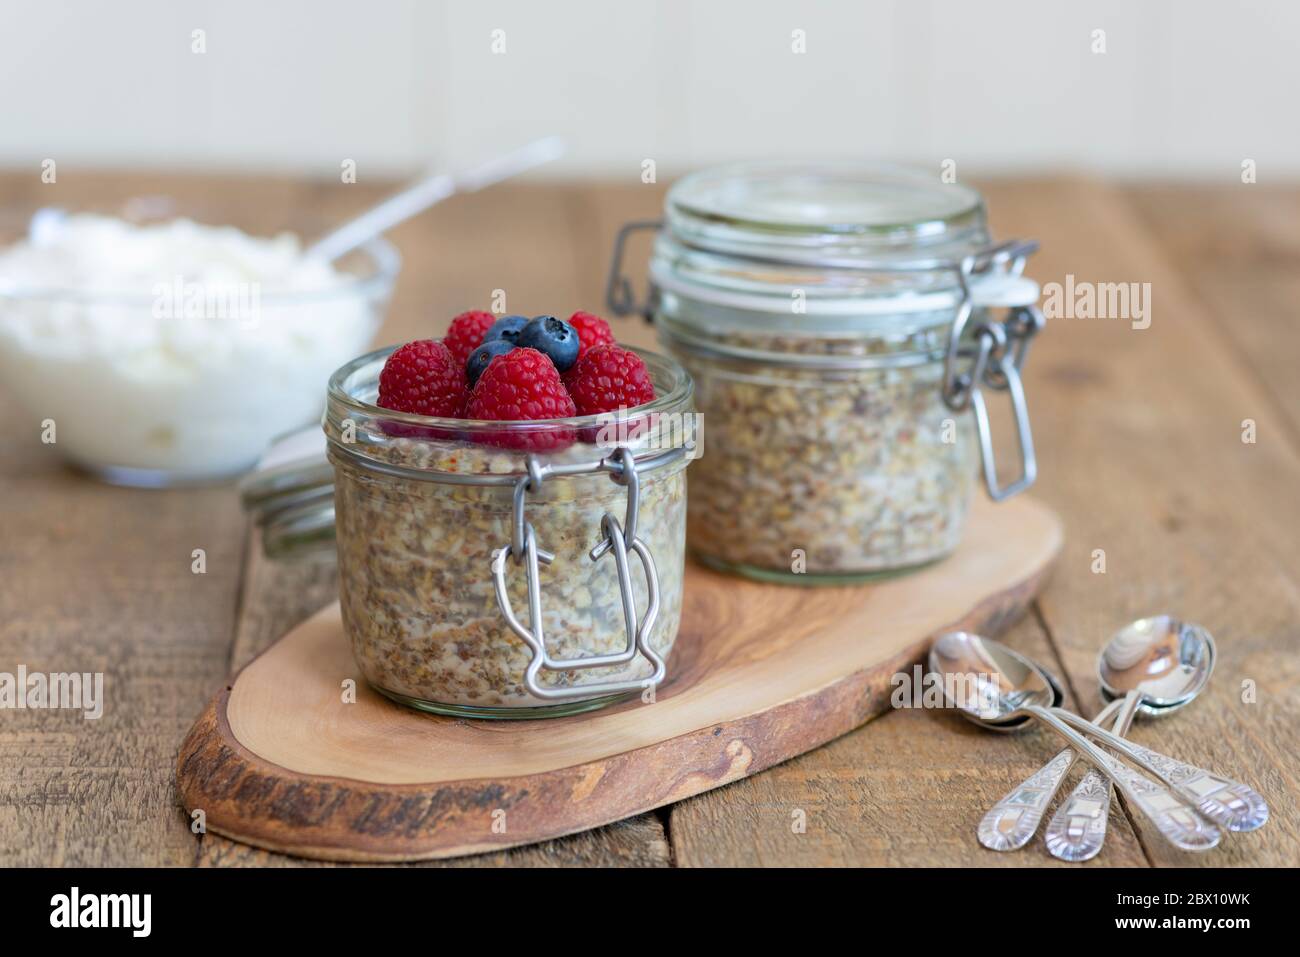 Overnight oats pots with raspberries and blueberries. Stock Photo